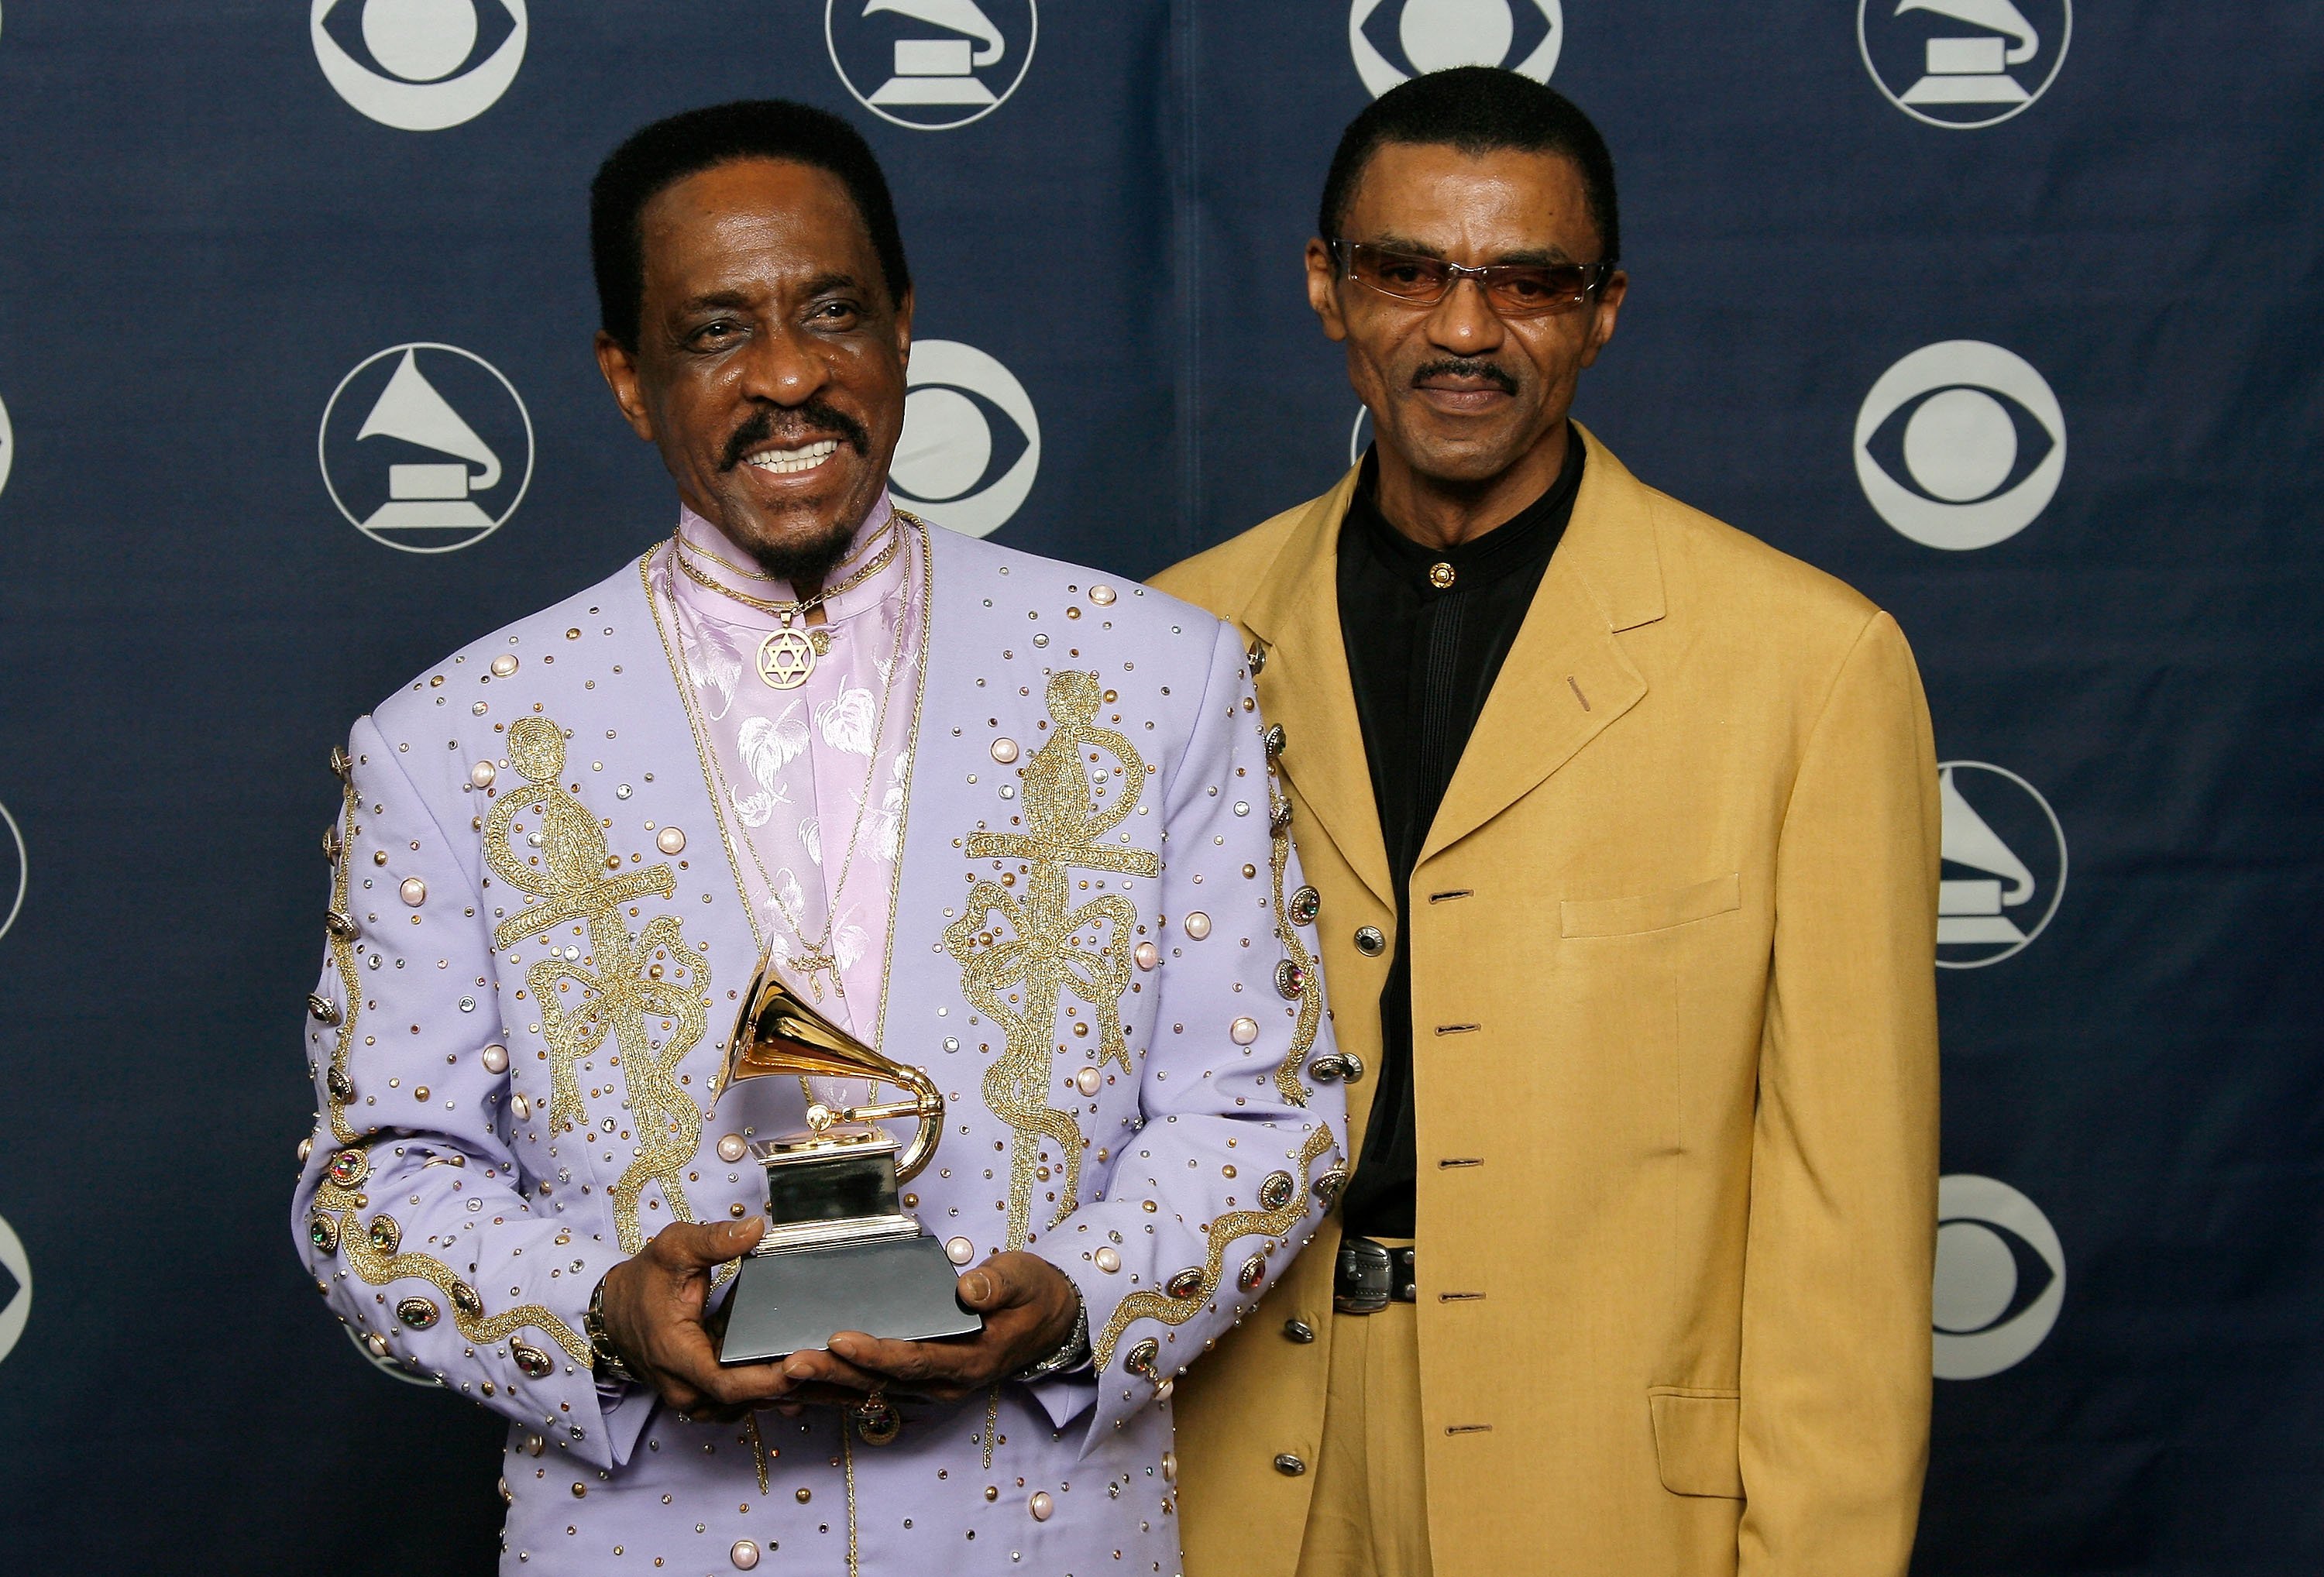 Ike Turner and Ike Turner Jr. after winning a Grammy for Best Traditional Blues Album. Ike Turner's album "Risin' With The Blues" took the award at the 49th Annual Grammy Awards, hosted at the Staples Center in Los Angeles, California, on February 11, 2007. | Source: Getty Images